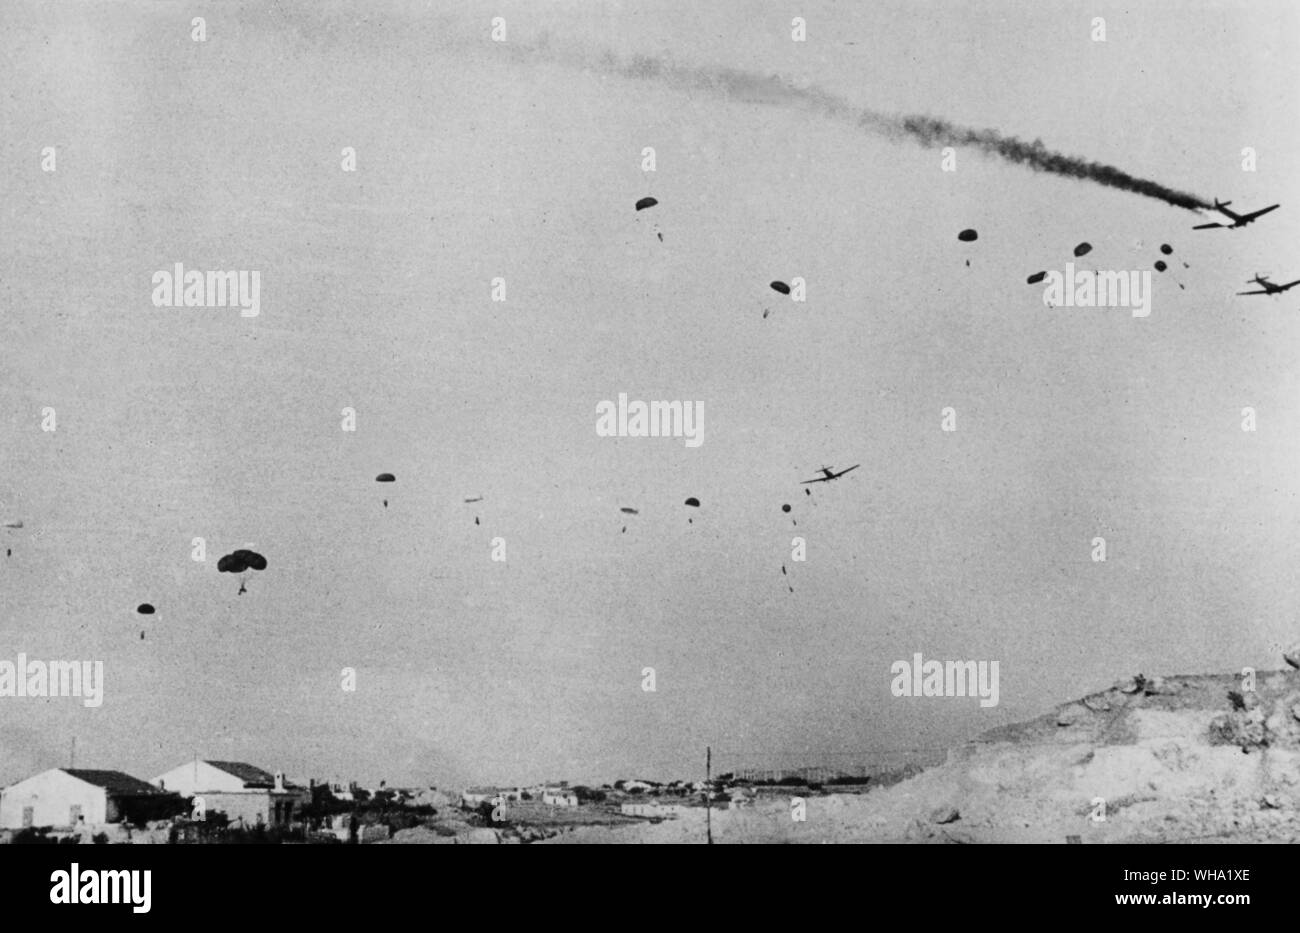 WW2: Parachute troops descending on Crete. Invasion of Crete began on 20th May 1941. Stock Photo